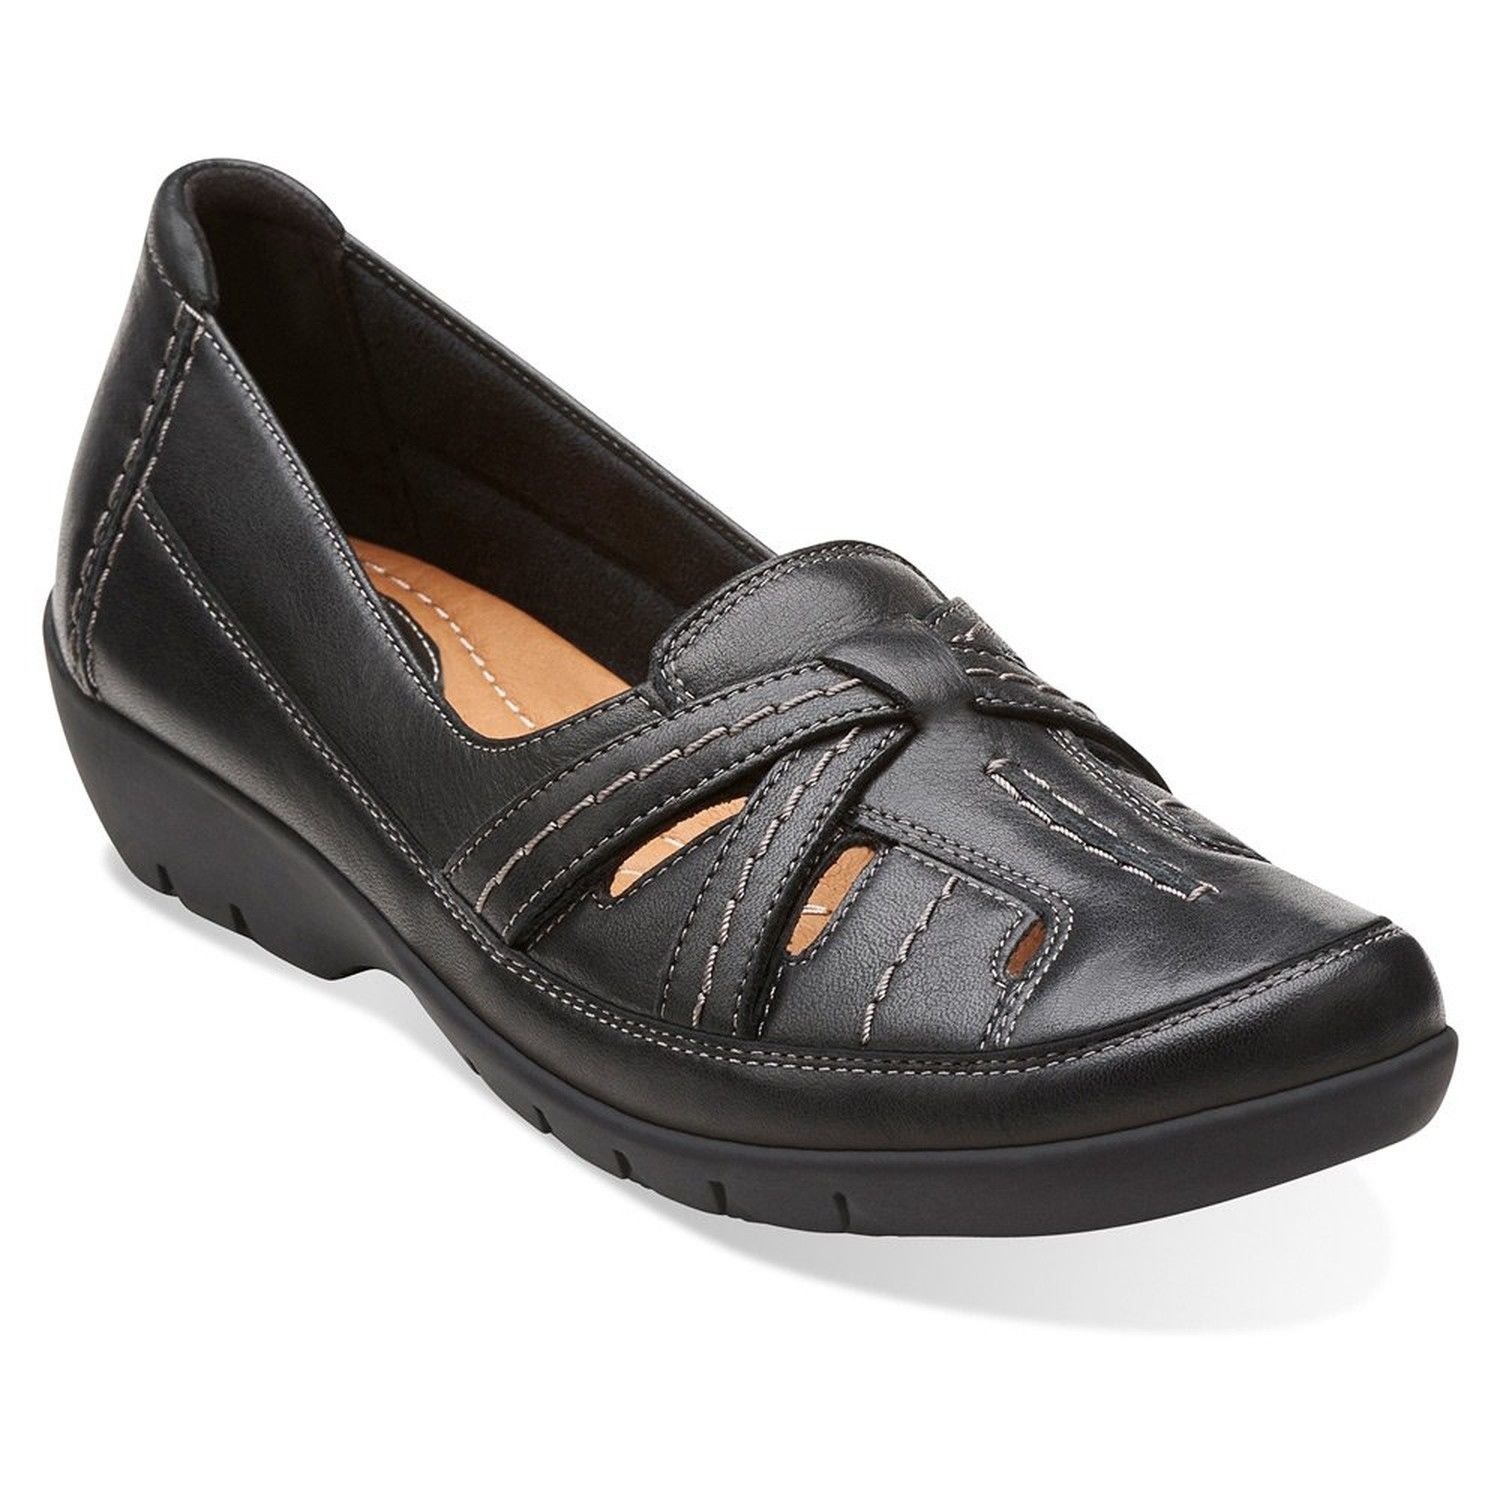 Clarks Women's Ordell Ava Loafers Shoes